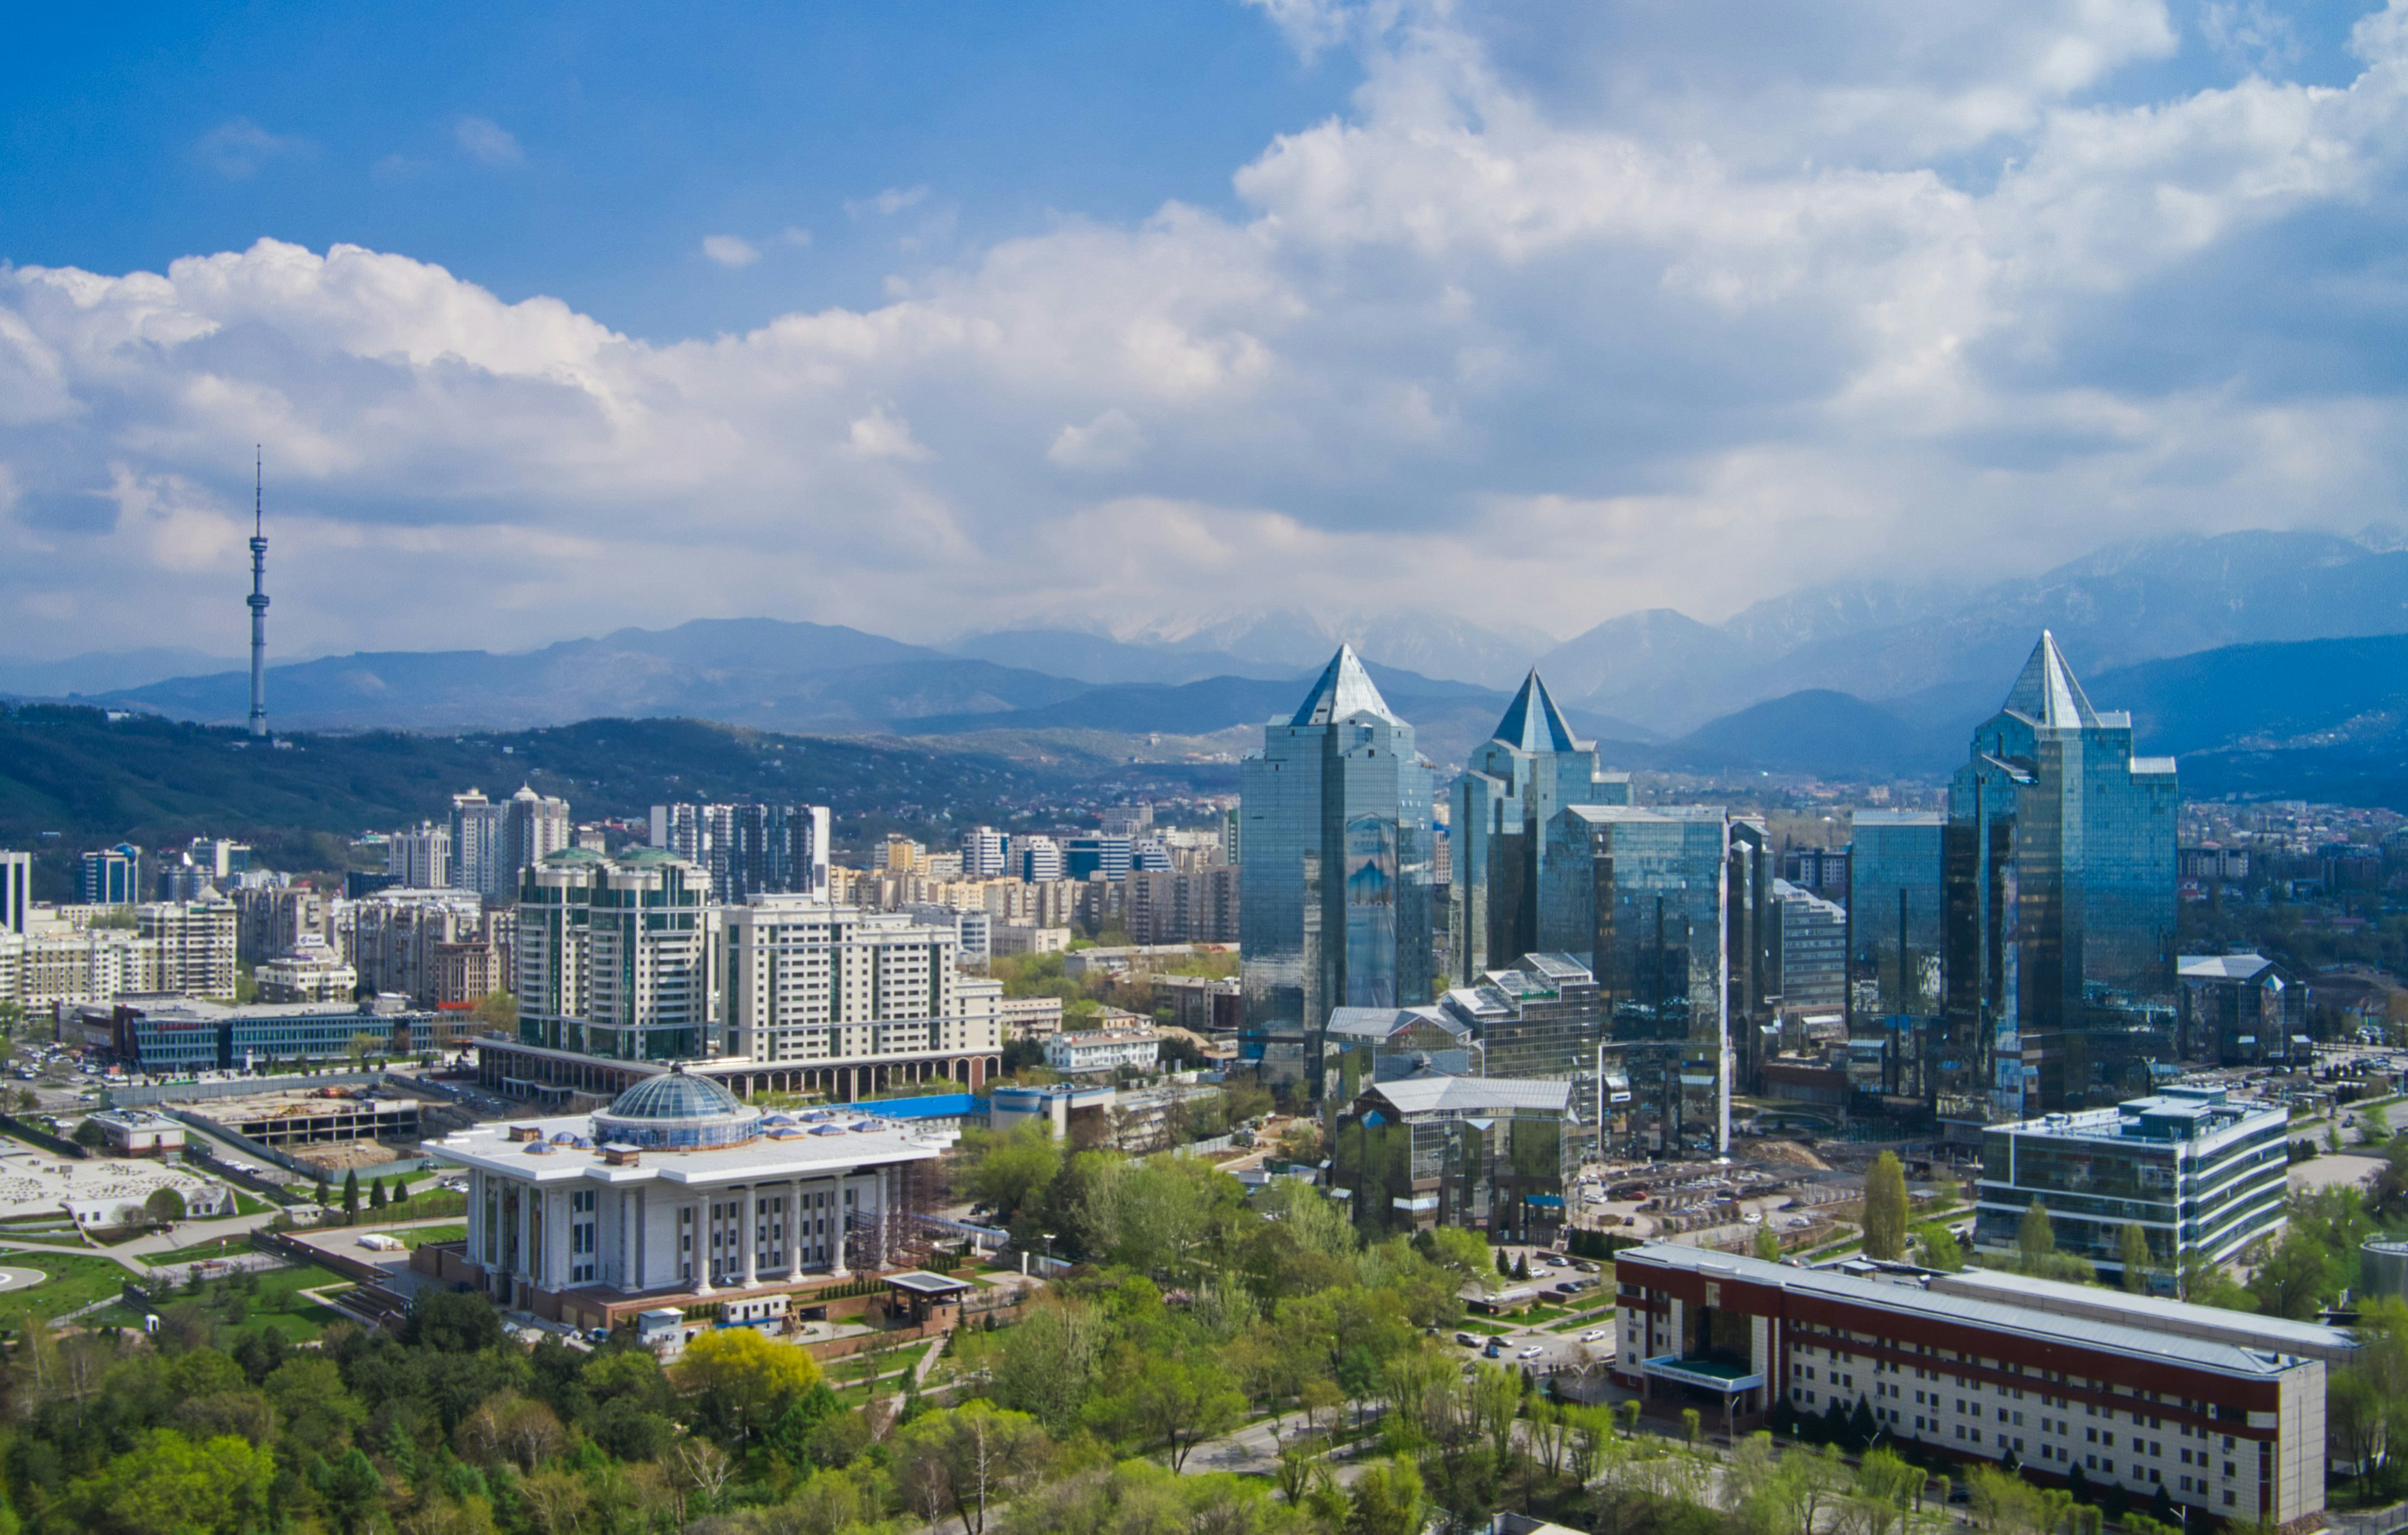 An aerial view of the Almaty skyline; showing modern skyscrapers, apartment blocks and green spaces backed by snow-capped mountains.